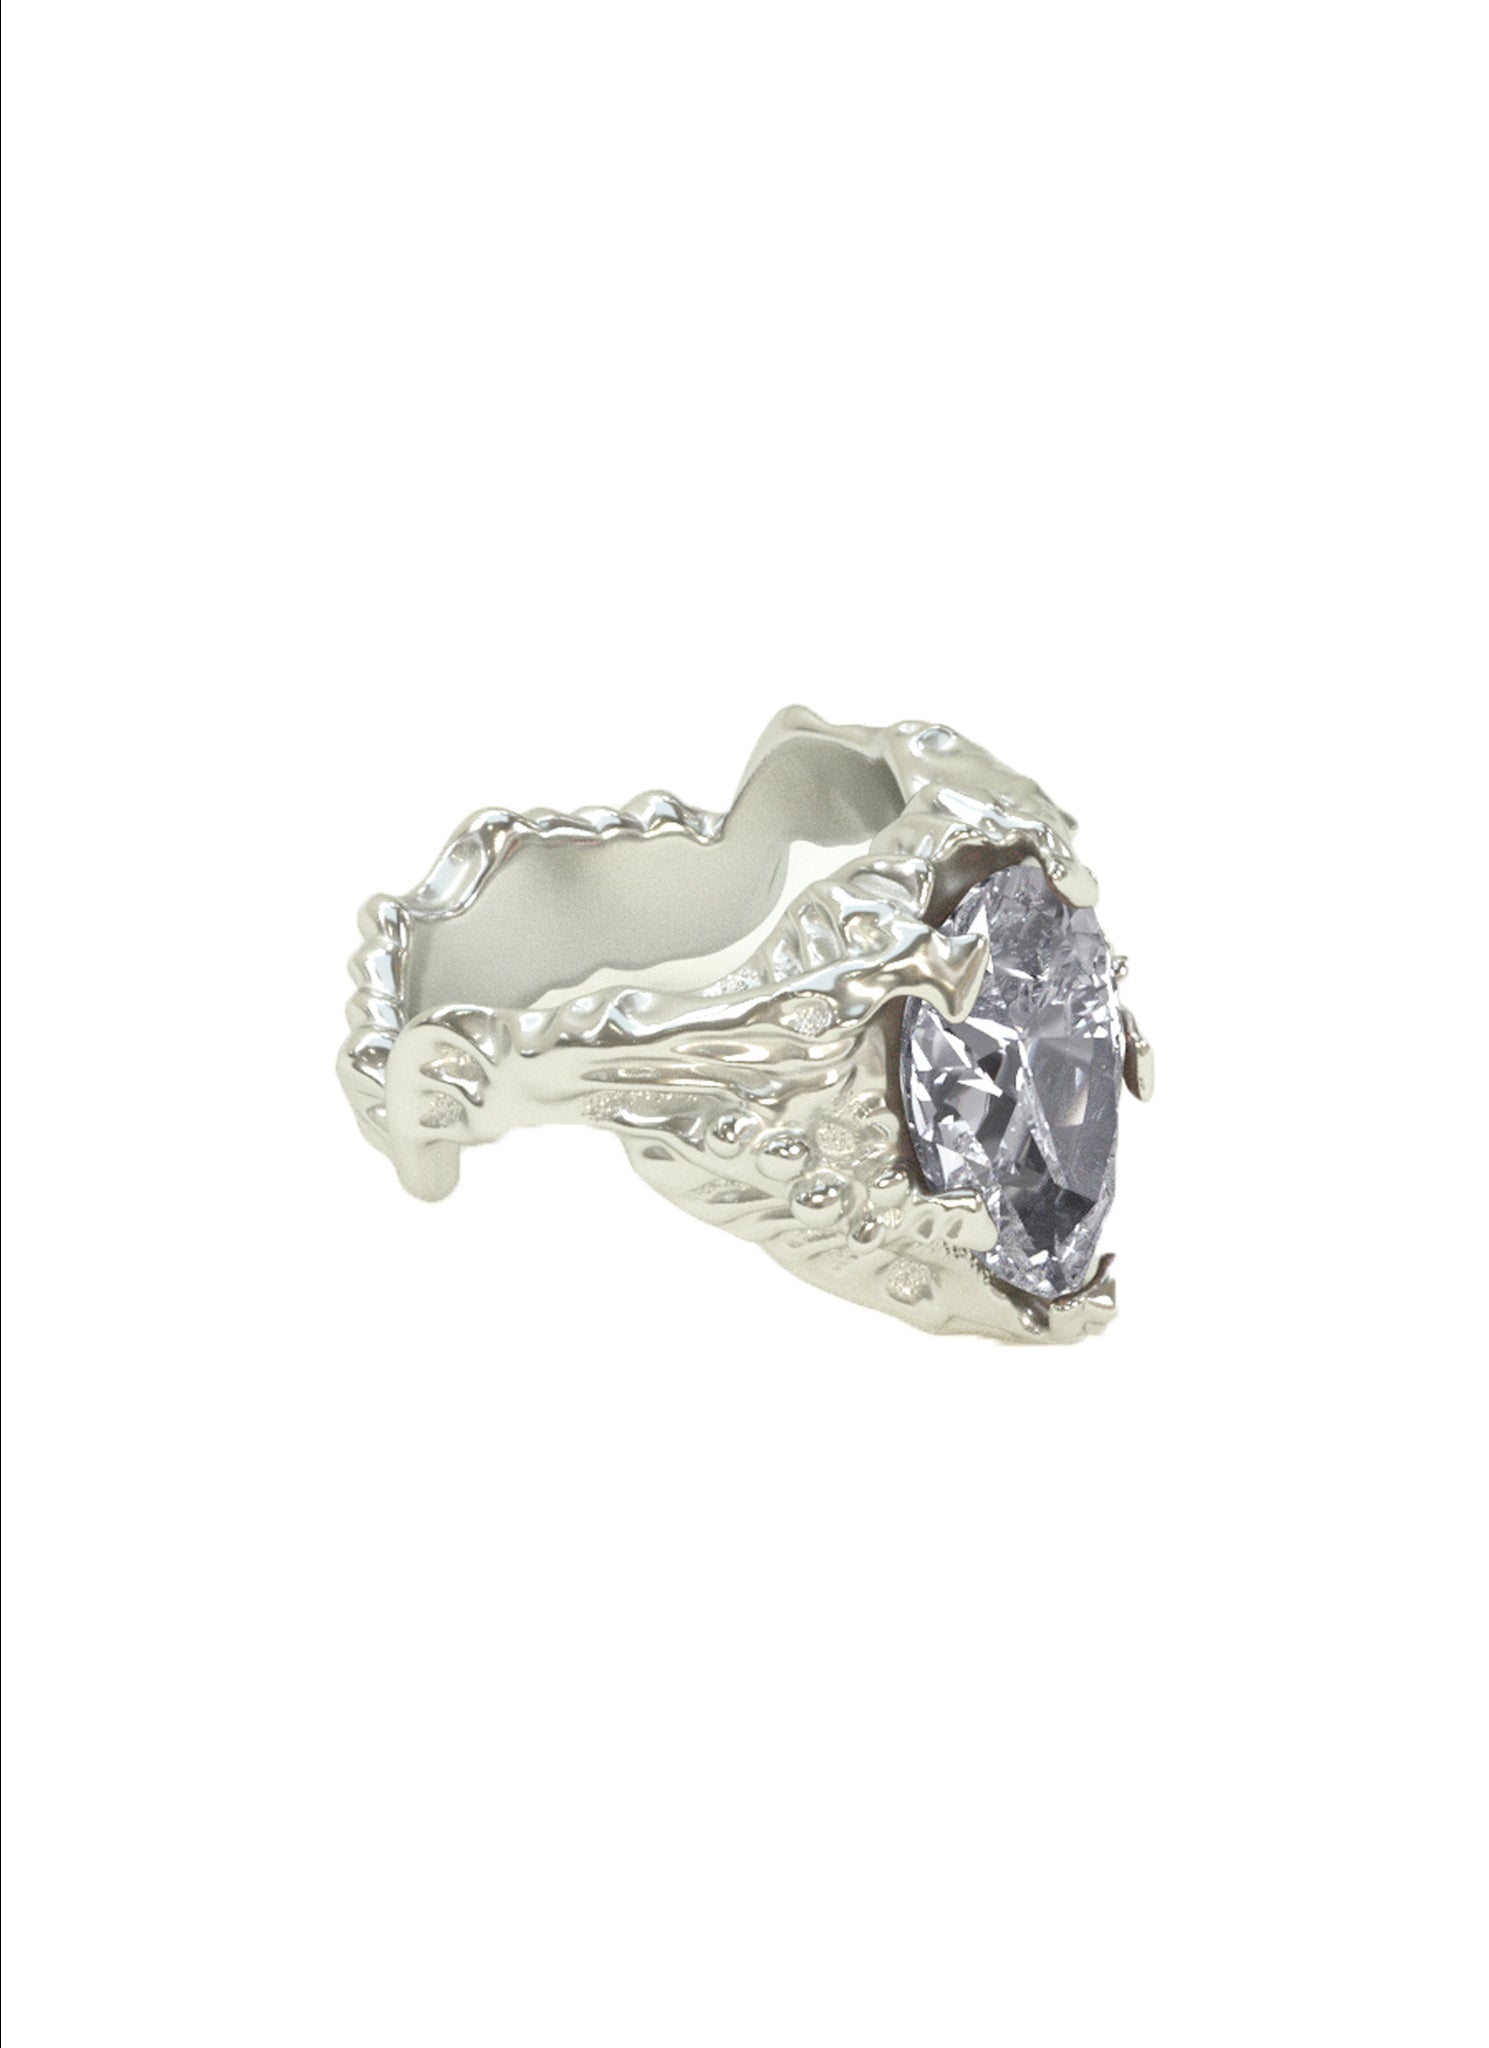 MOLTEN CLEAR PEAR CUT RING - LETRA